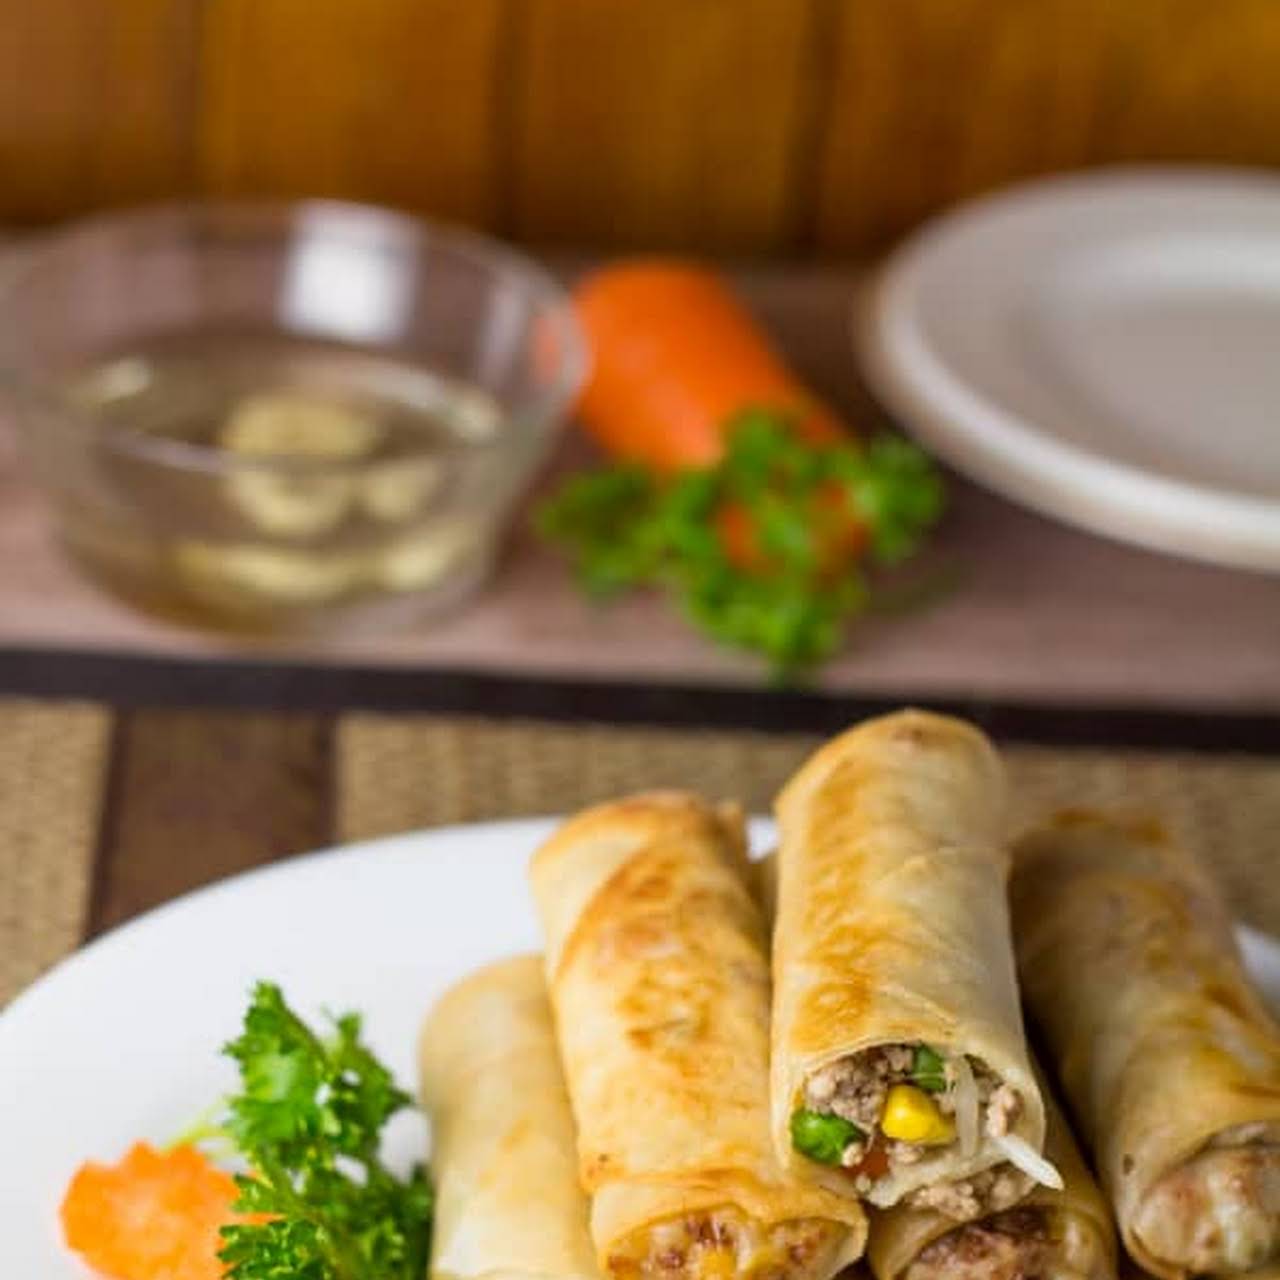 Lumpiang Prito (Pork and Vegetable Spring Roll)